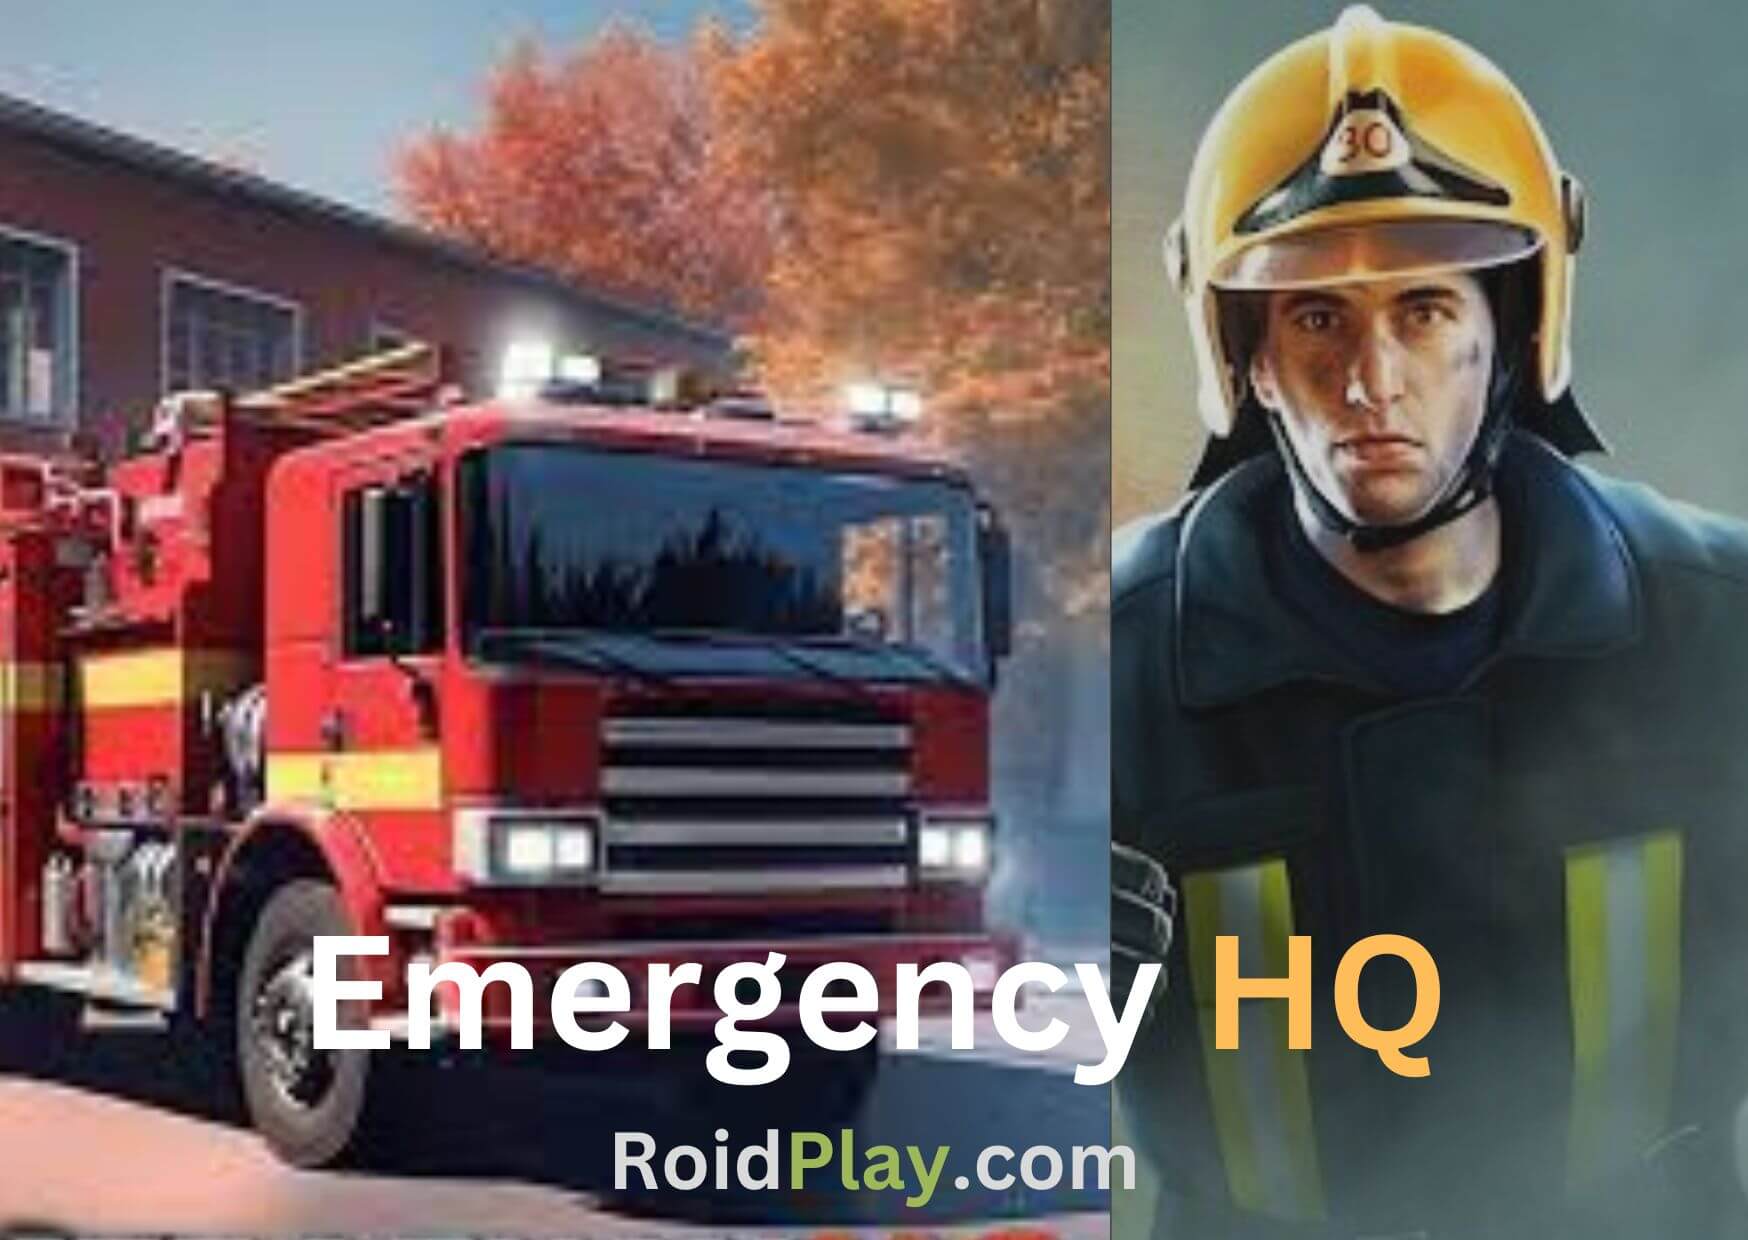 Emergency HQ APK free for Android